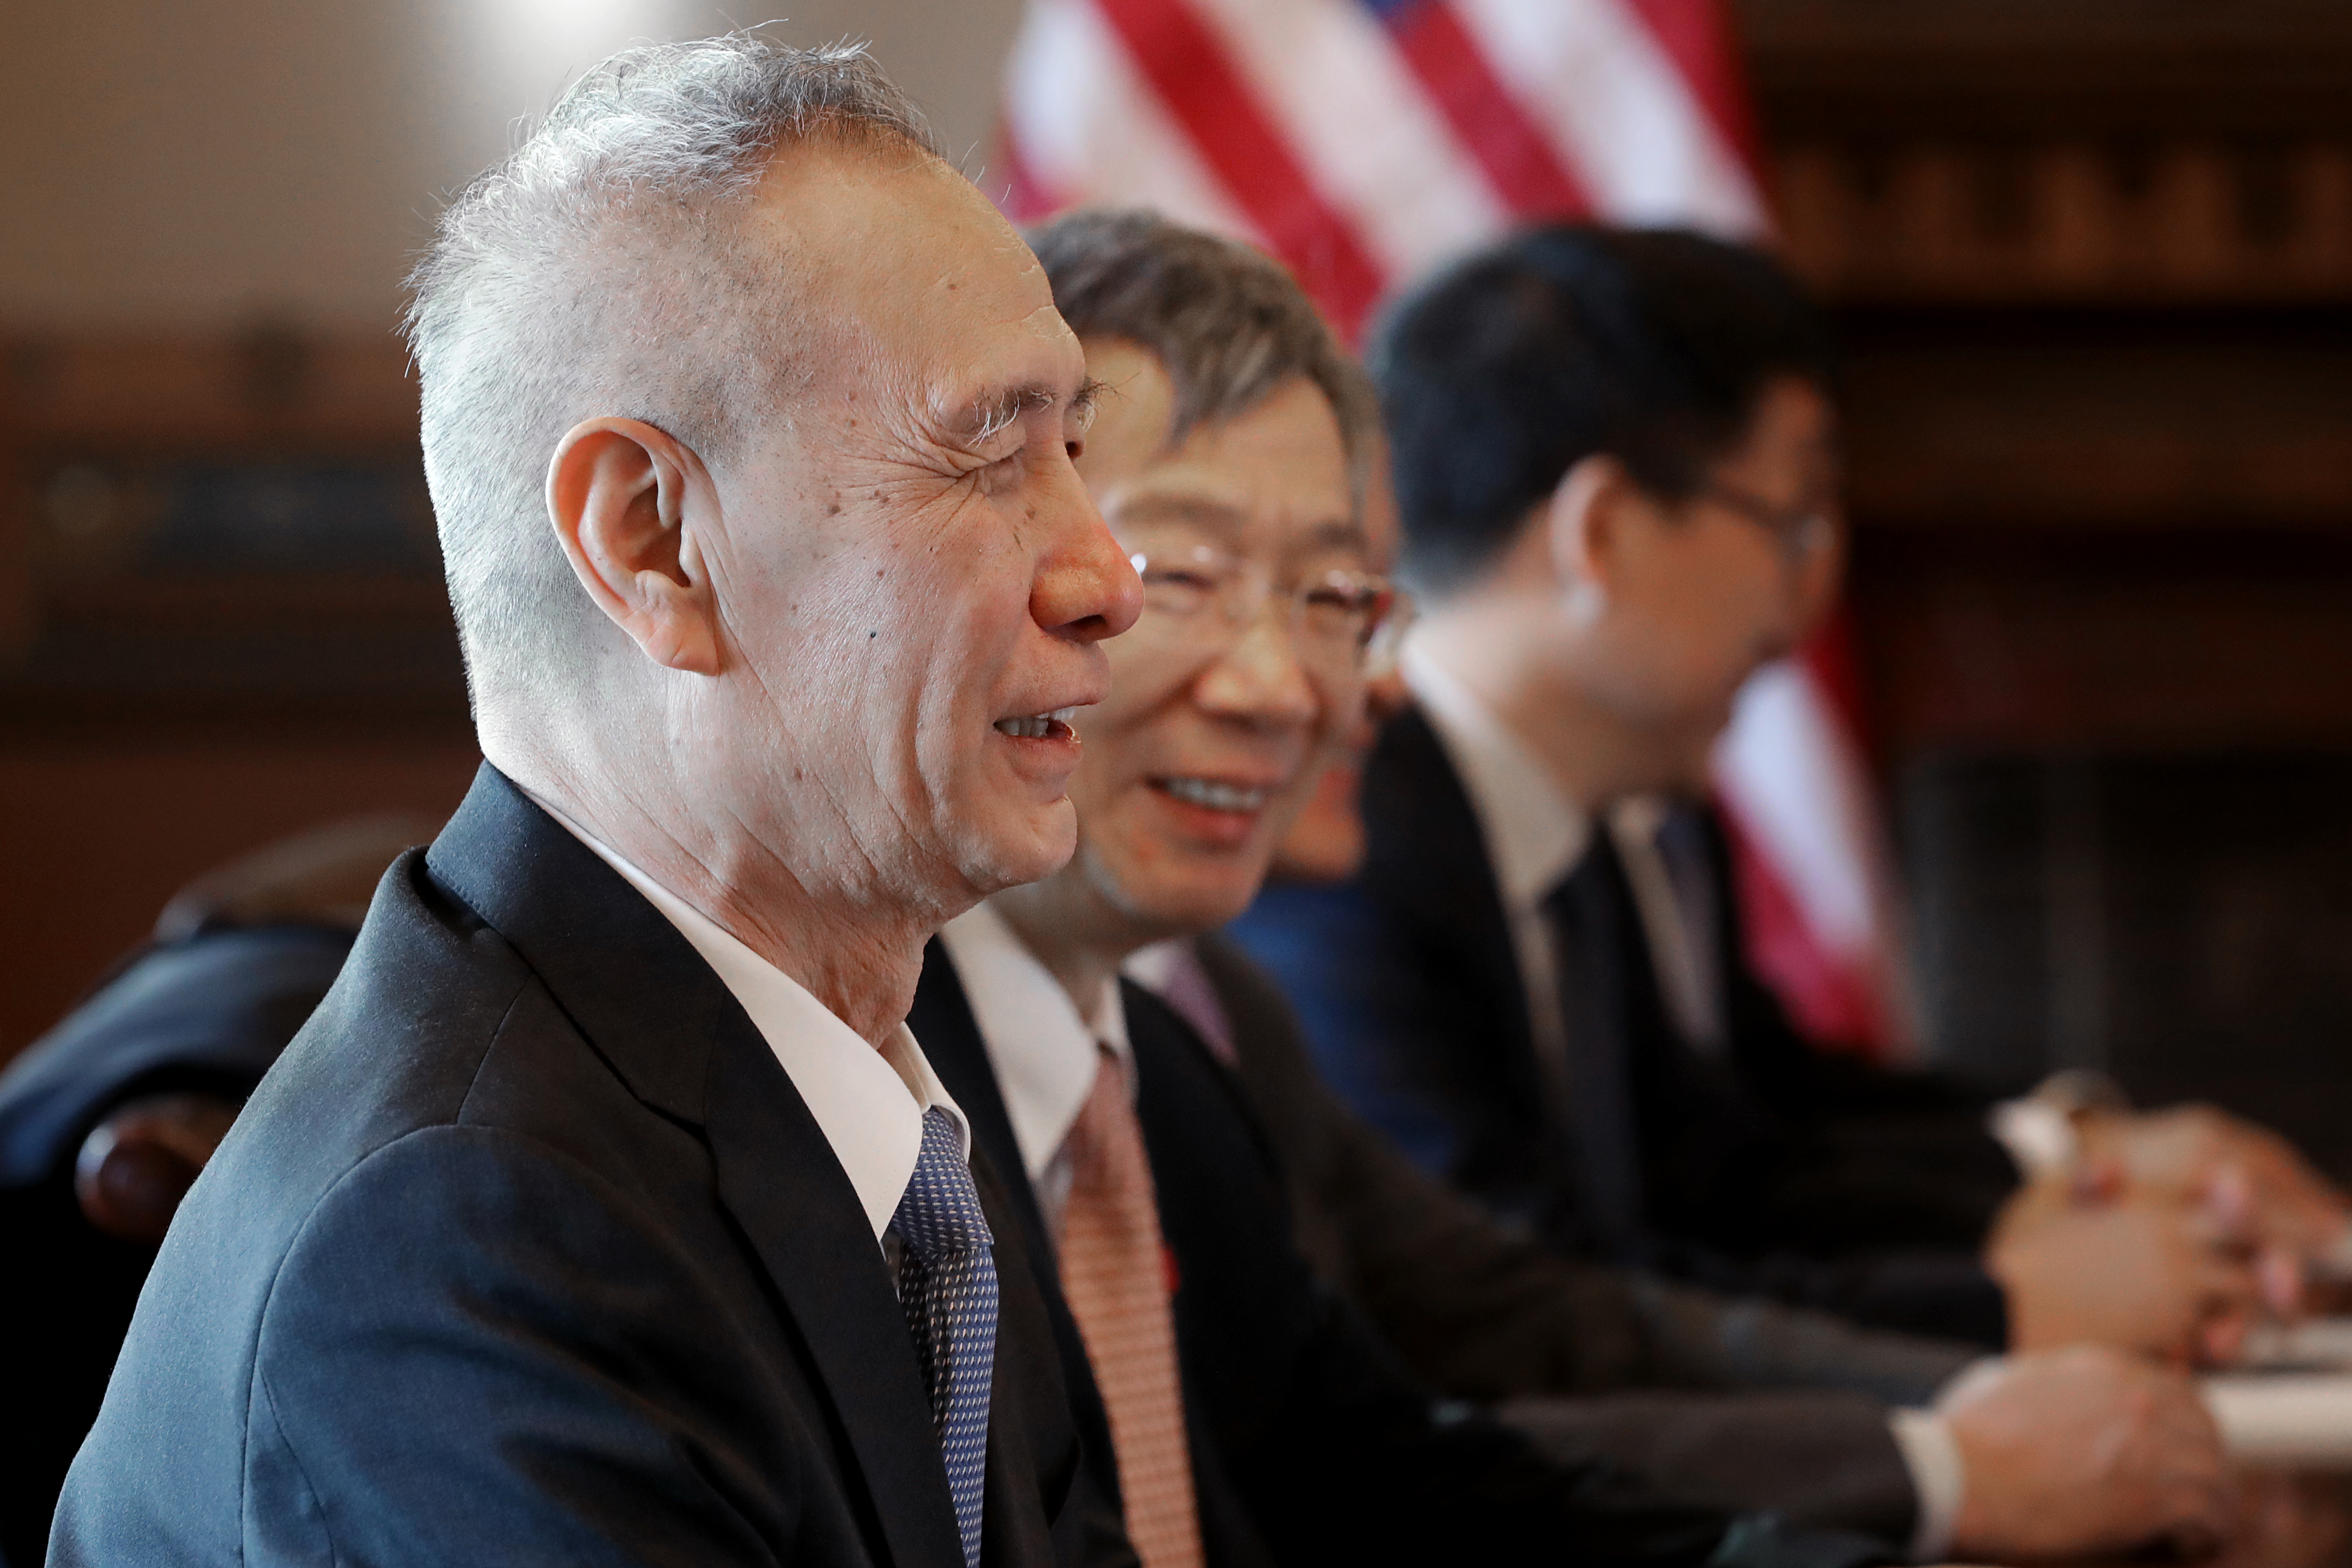 Chinese Vice Premier Liu He (L), Central Bank Governor Yi Gang (2nd L) and other Chinese vice ministers and senior officials sit down with Trump Administration officials for negotiations in the Diplomatic Room at the Eisenhower Executive Office Building January 30, 2019 in Washington, DC. (Photo by Chip Somodevilla/Getty Images)